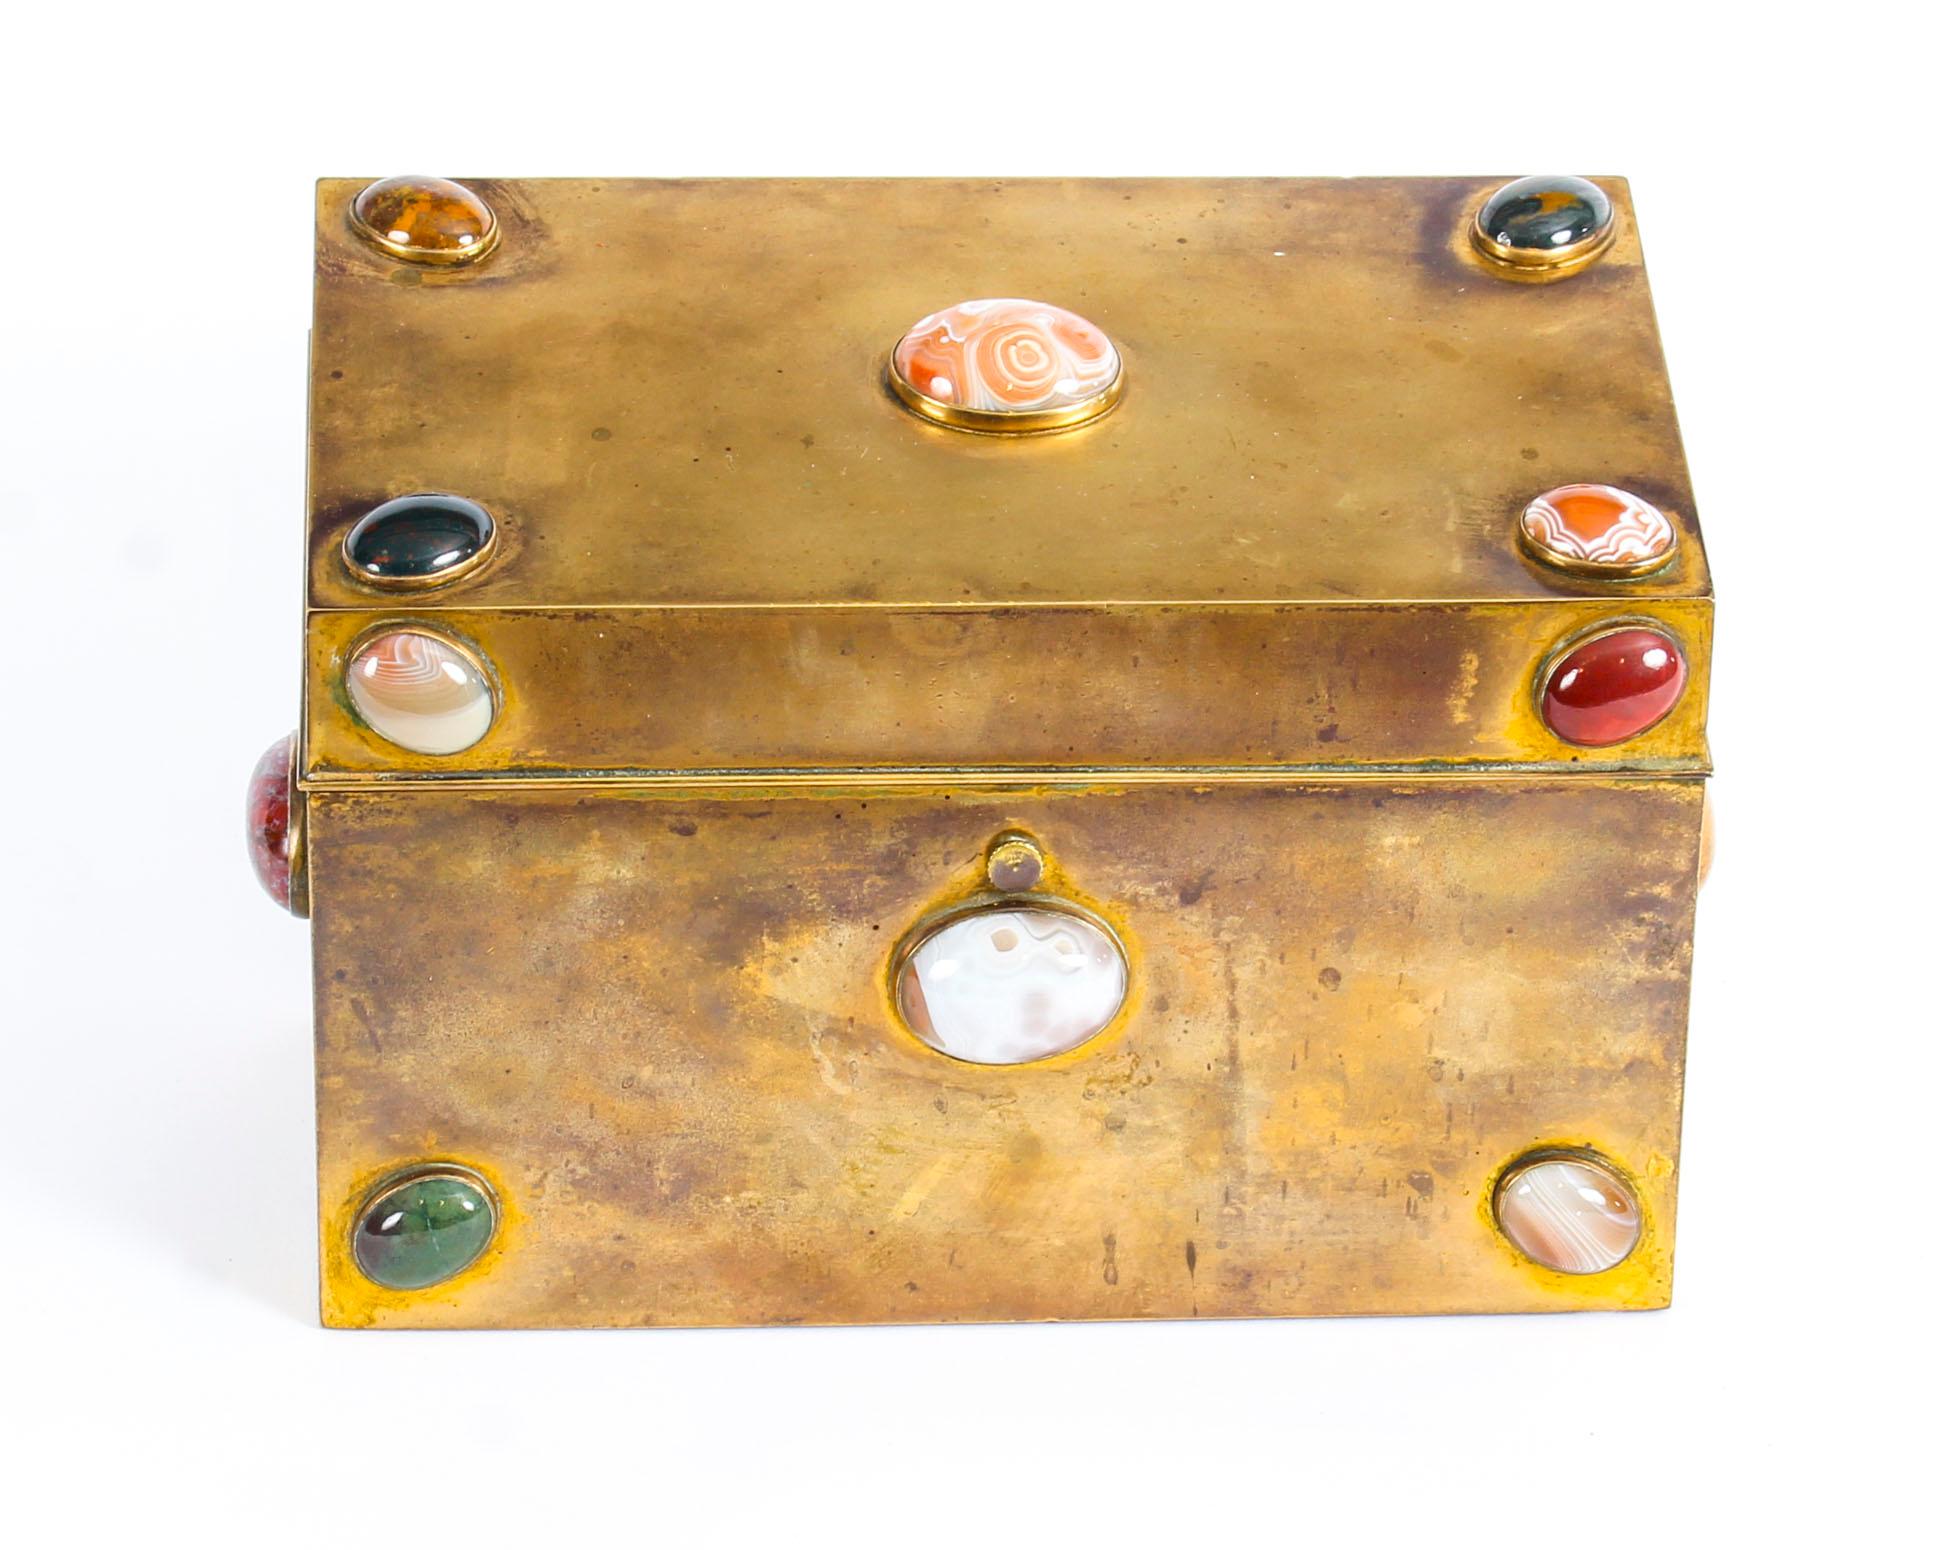 This is a superb quality Victorian brass stationery casket, circa 1860 in date.

This wonderful stationery casket is rectangular in shape and features twelve distinctive applied polished semi-precious stones - including agate, jasper, and